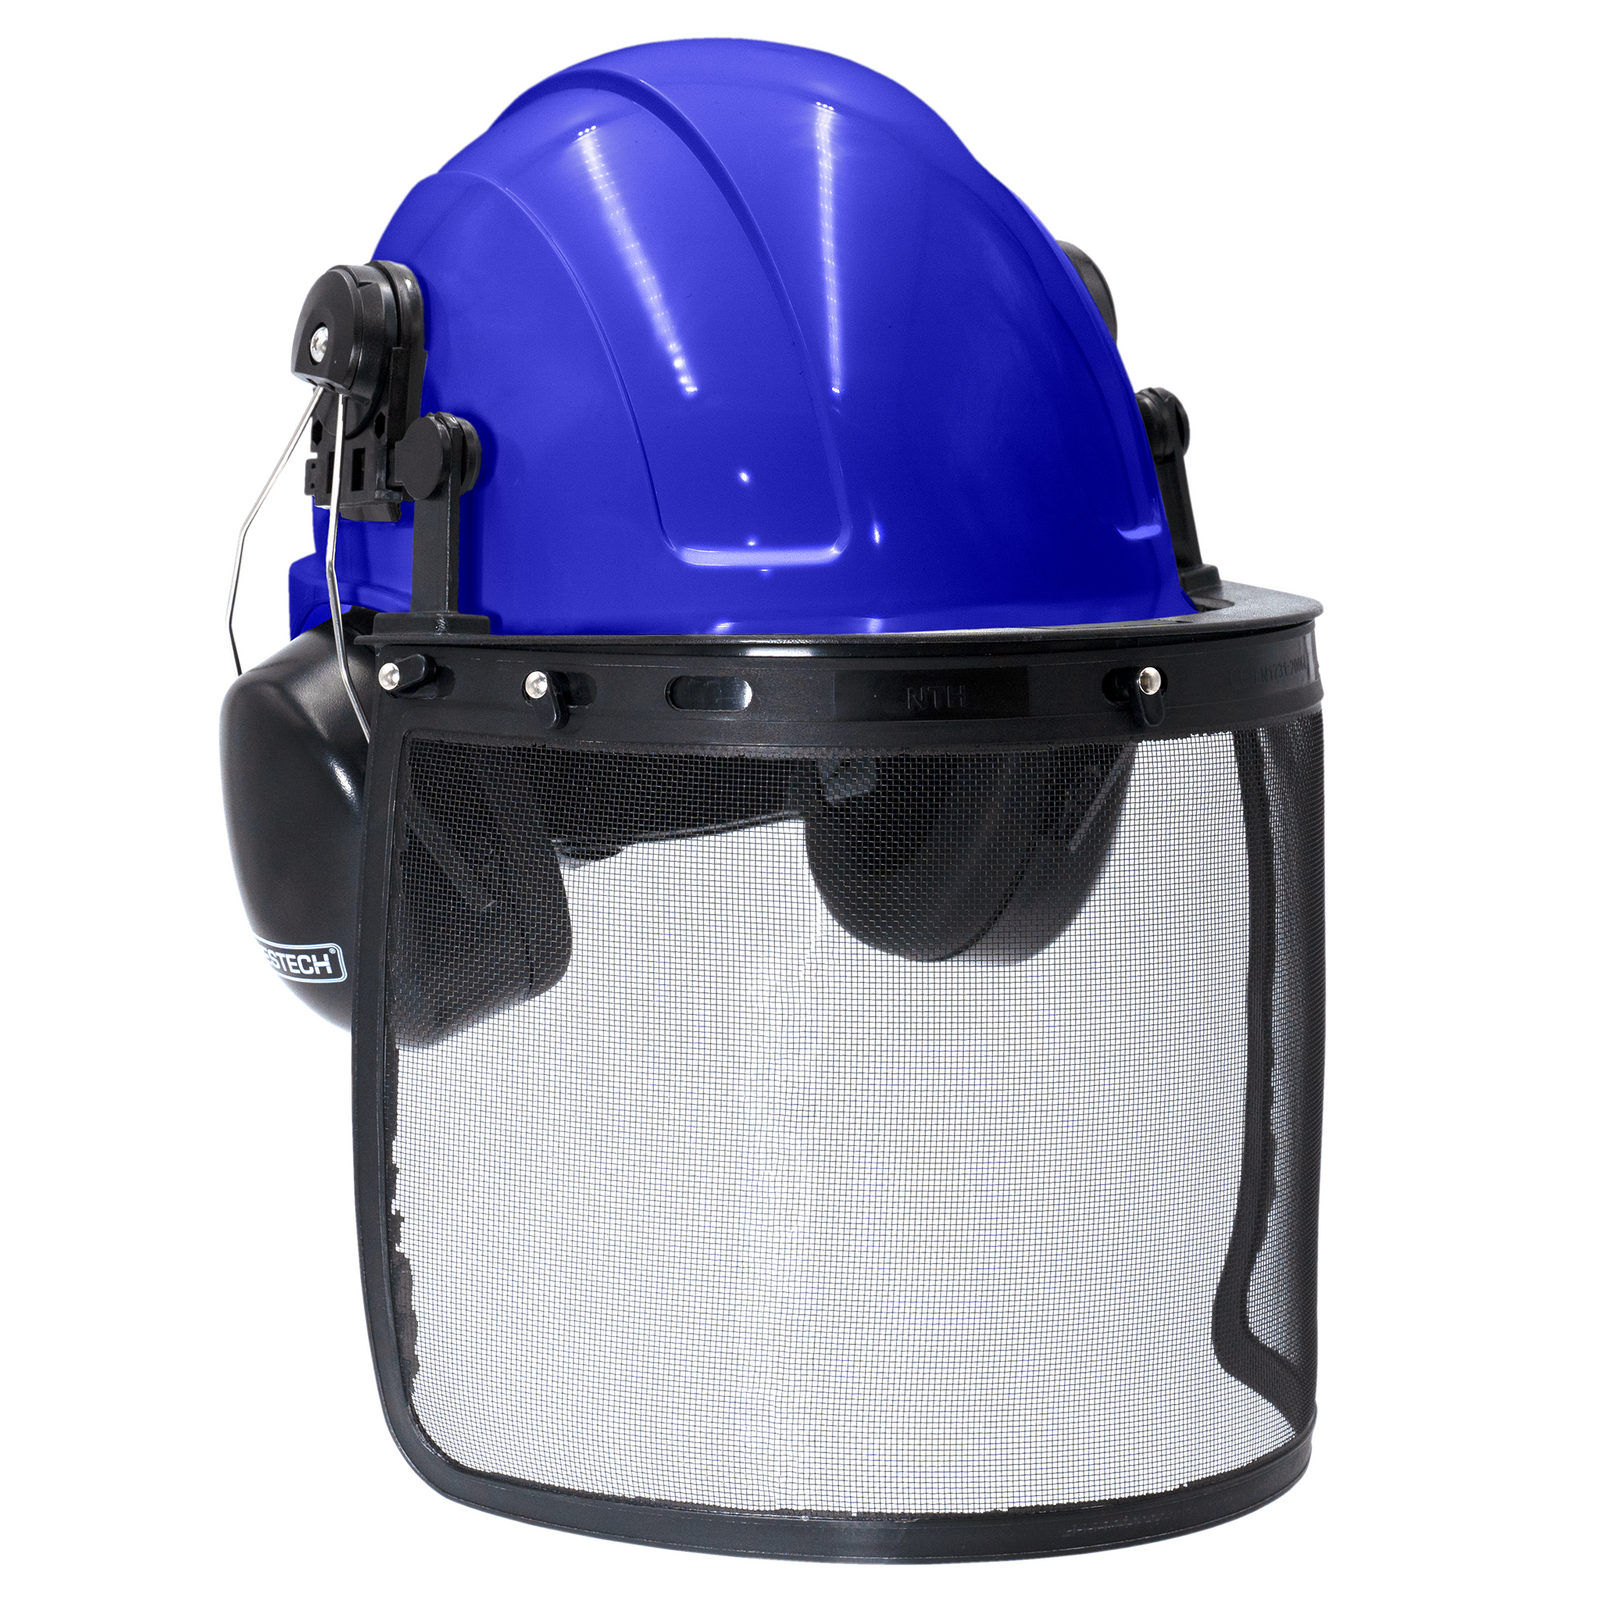 Blue safety cap style helmet with iron mesh face shield and earmuffs for hearing protection